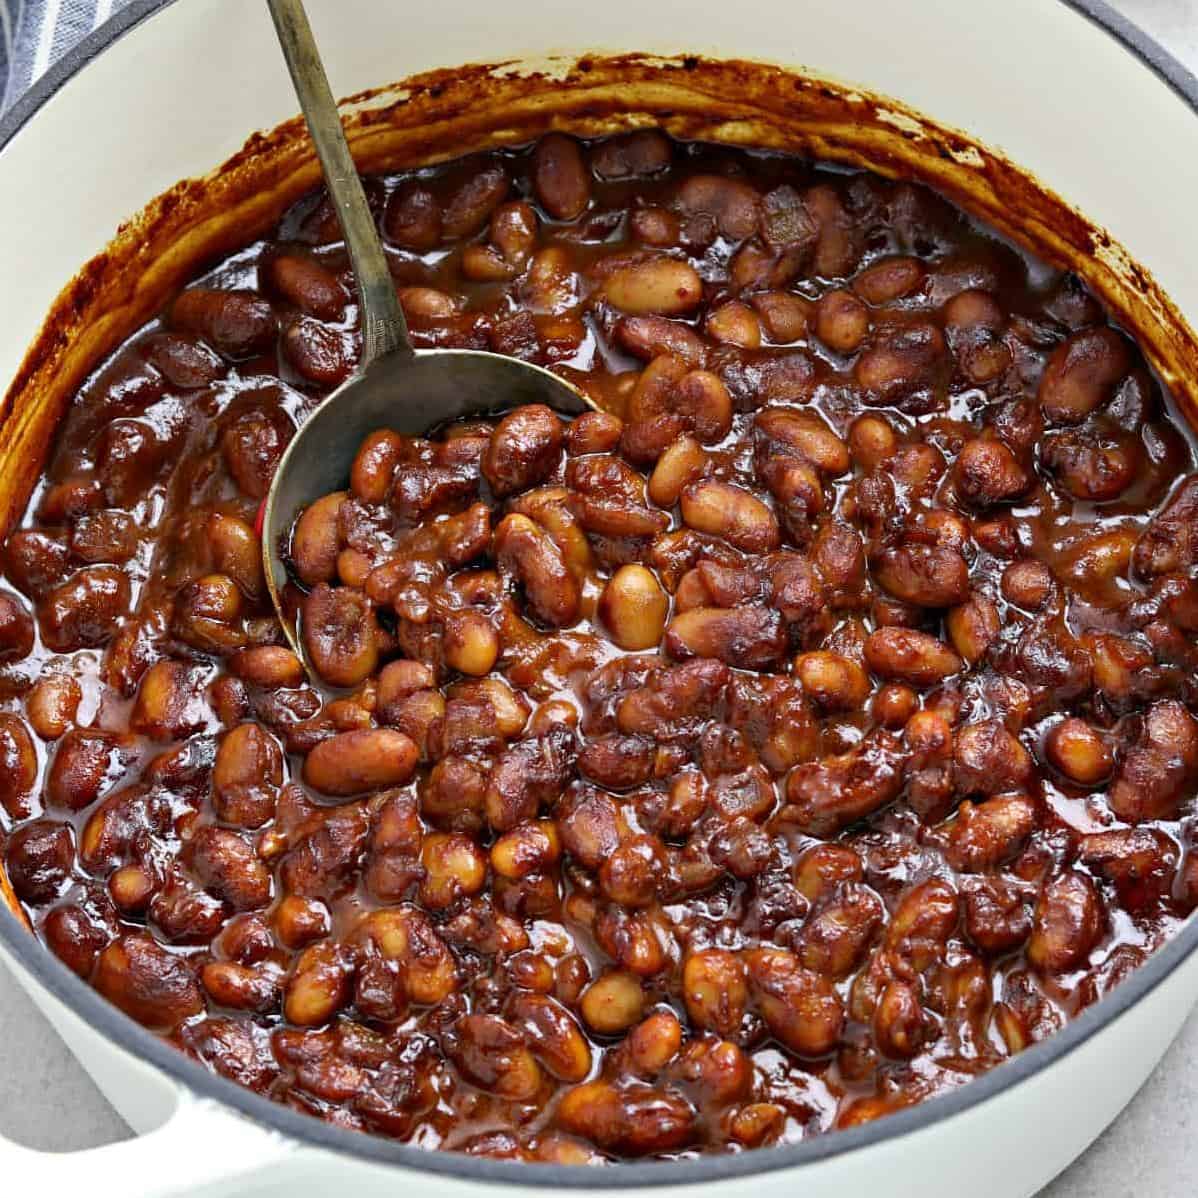  These baked beans are like a warm, comforting hug on a cold day.